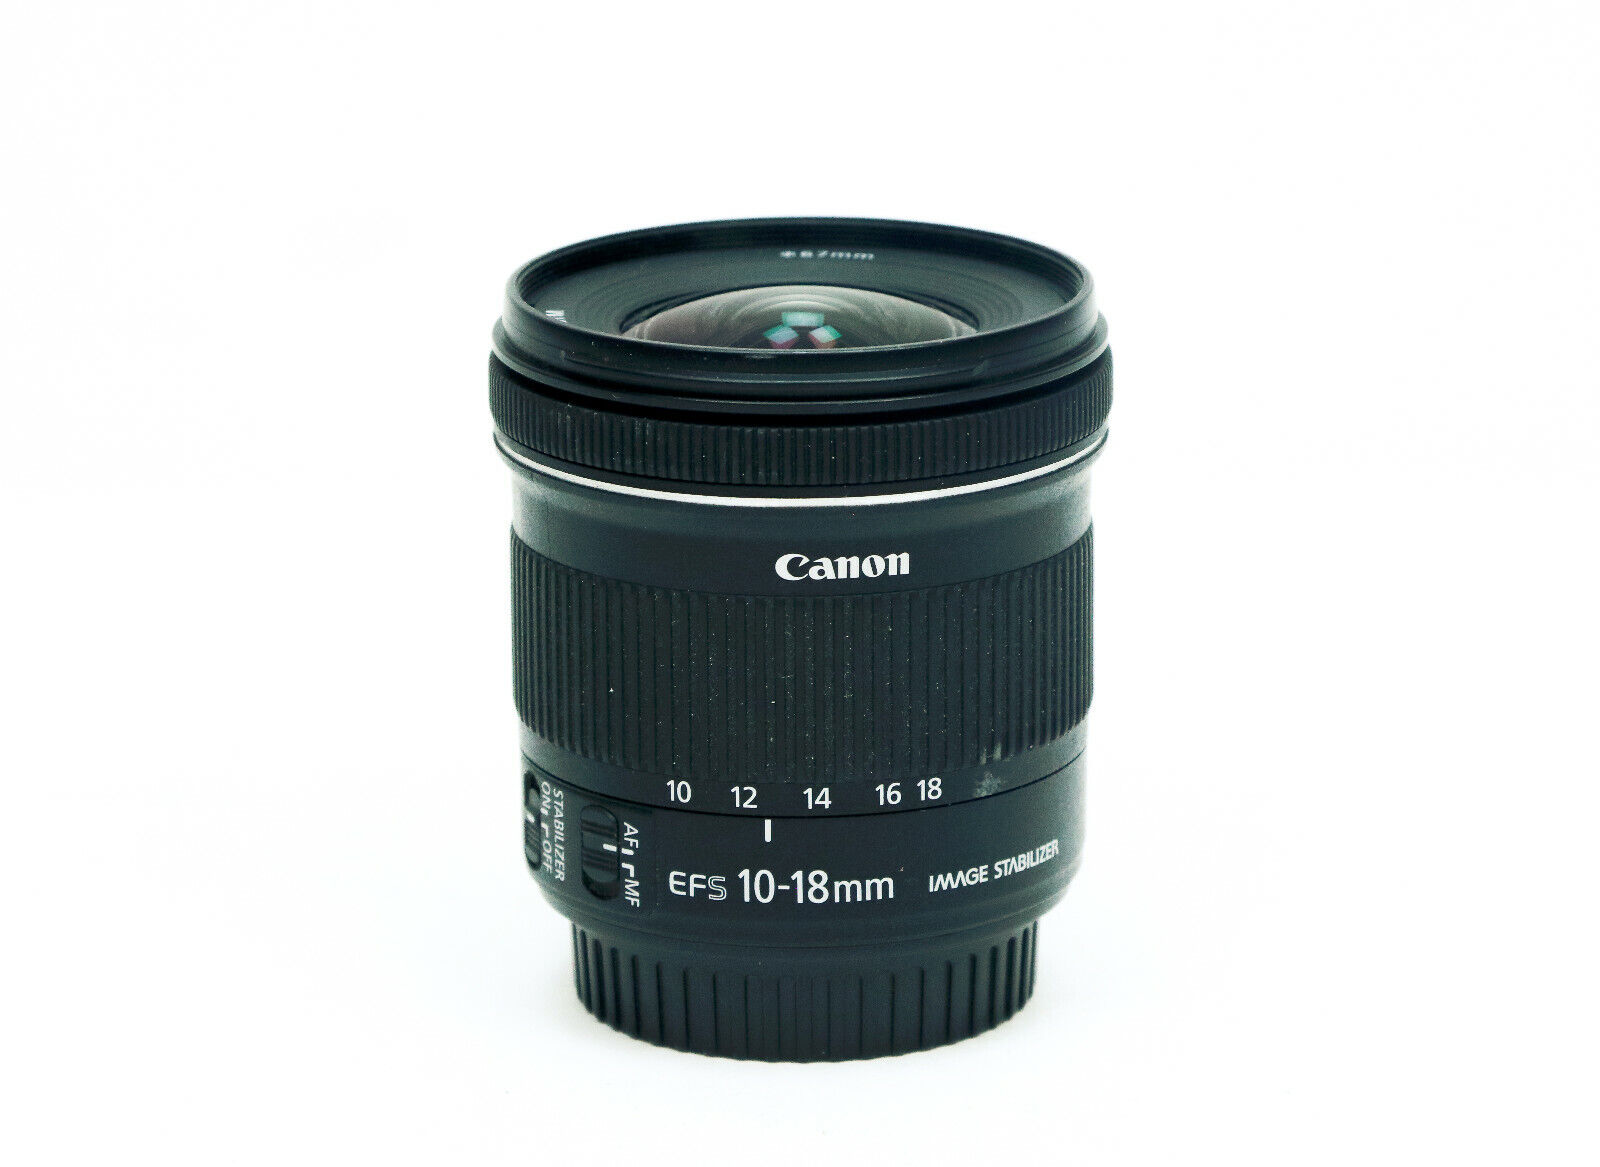 Canon EF-S 10-18mm F/4.5-5.6 IS STM Lens - Pro Workhorse